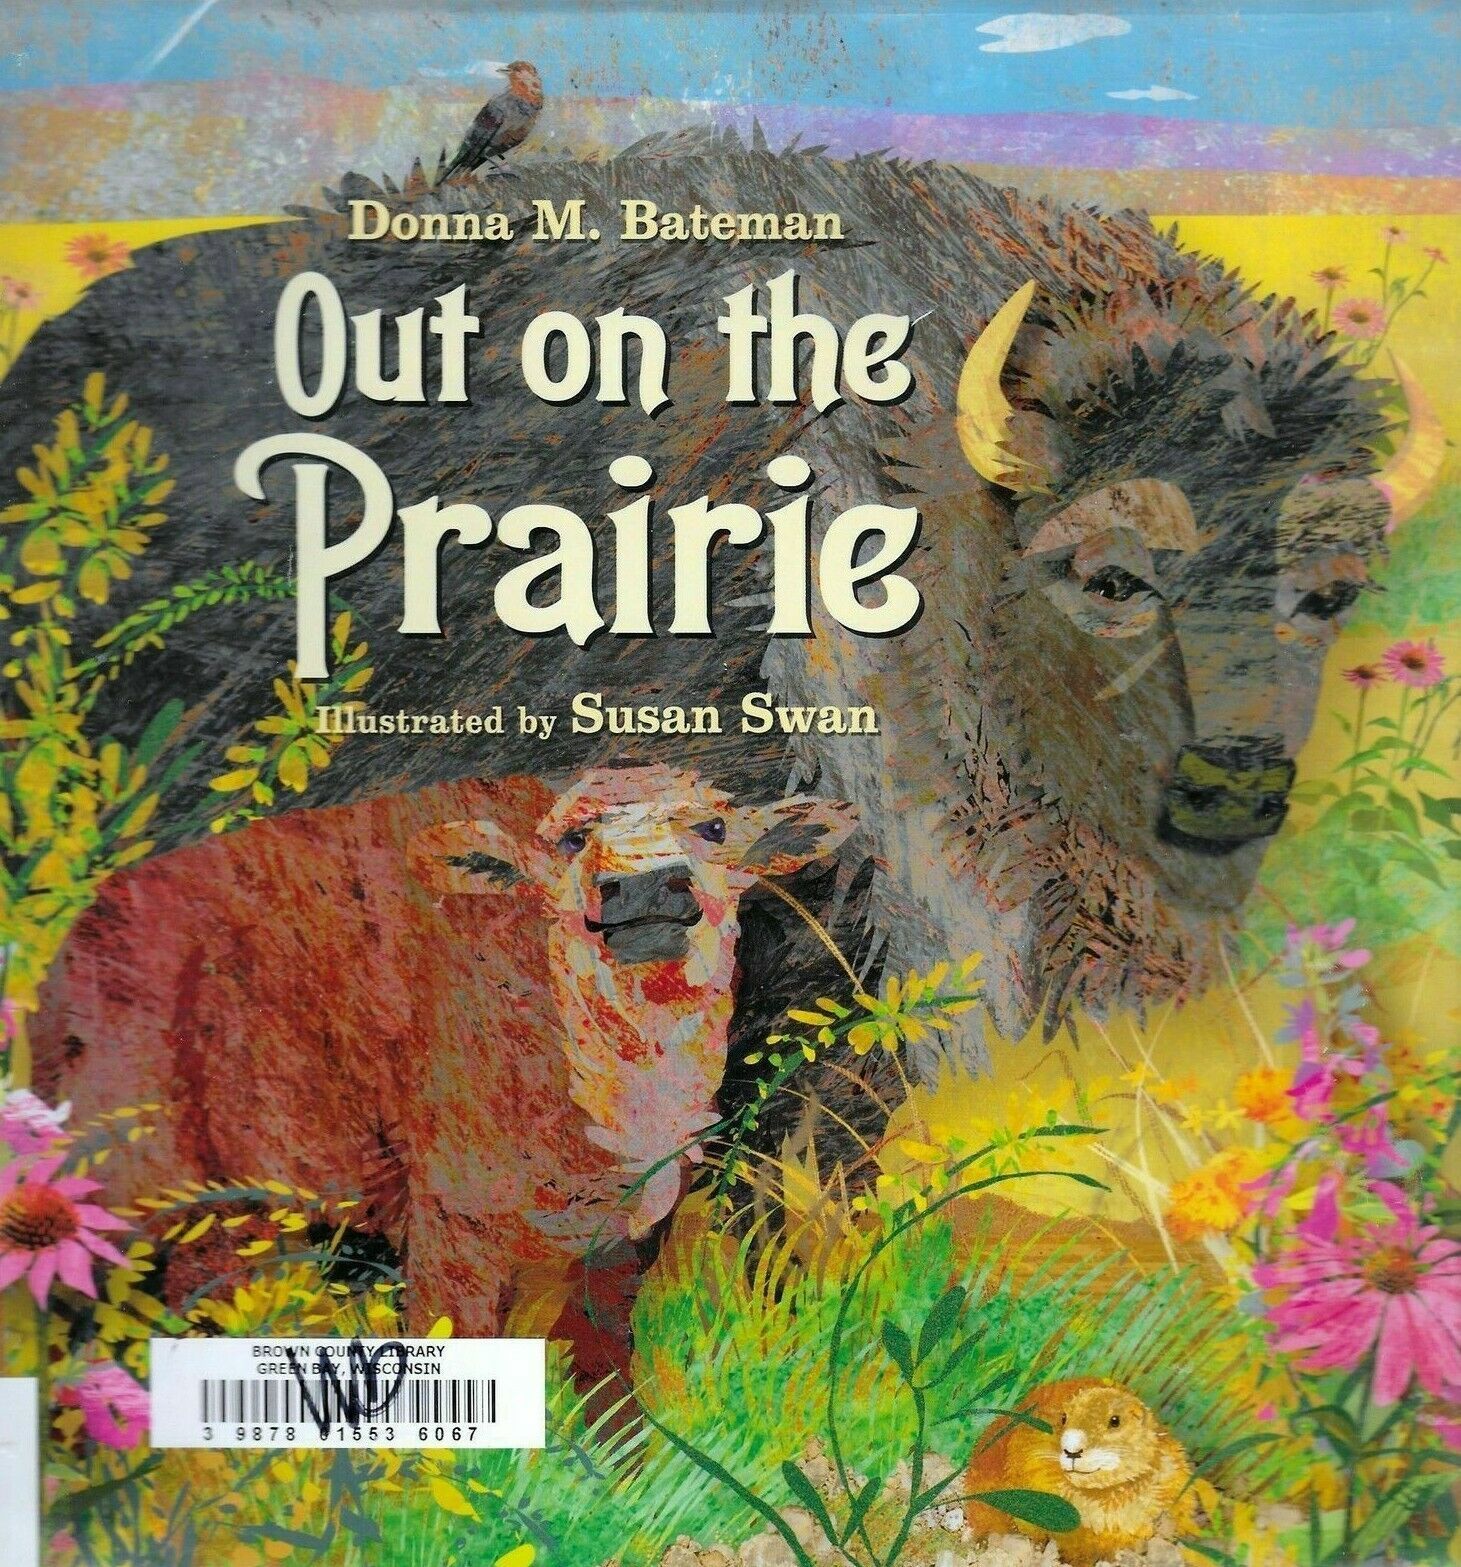 Primary image for Out on the Prairie by Donna M. Bateman (2012, Hardcover) Badlands Counting Book